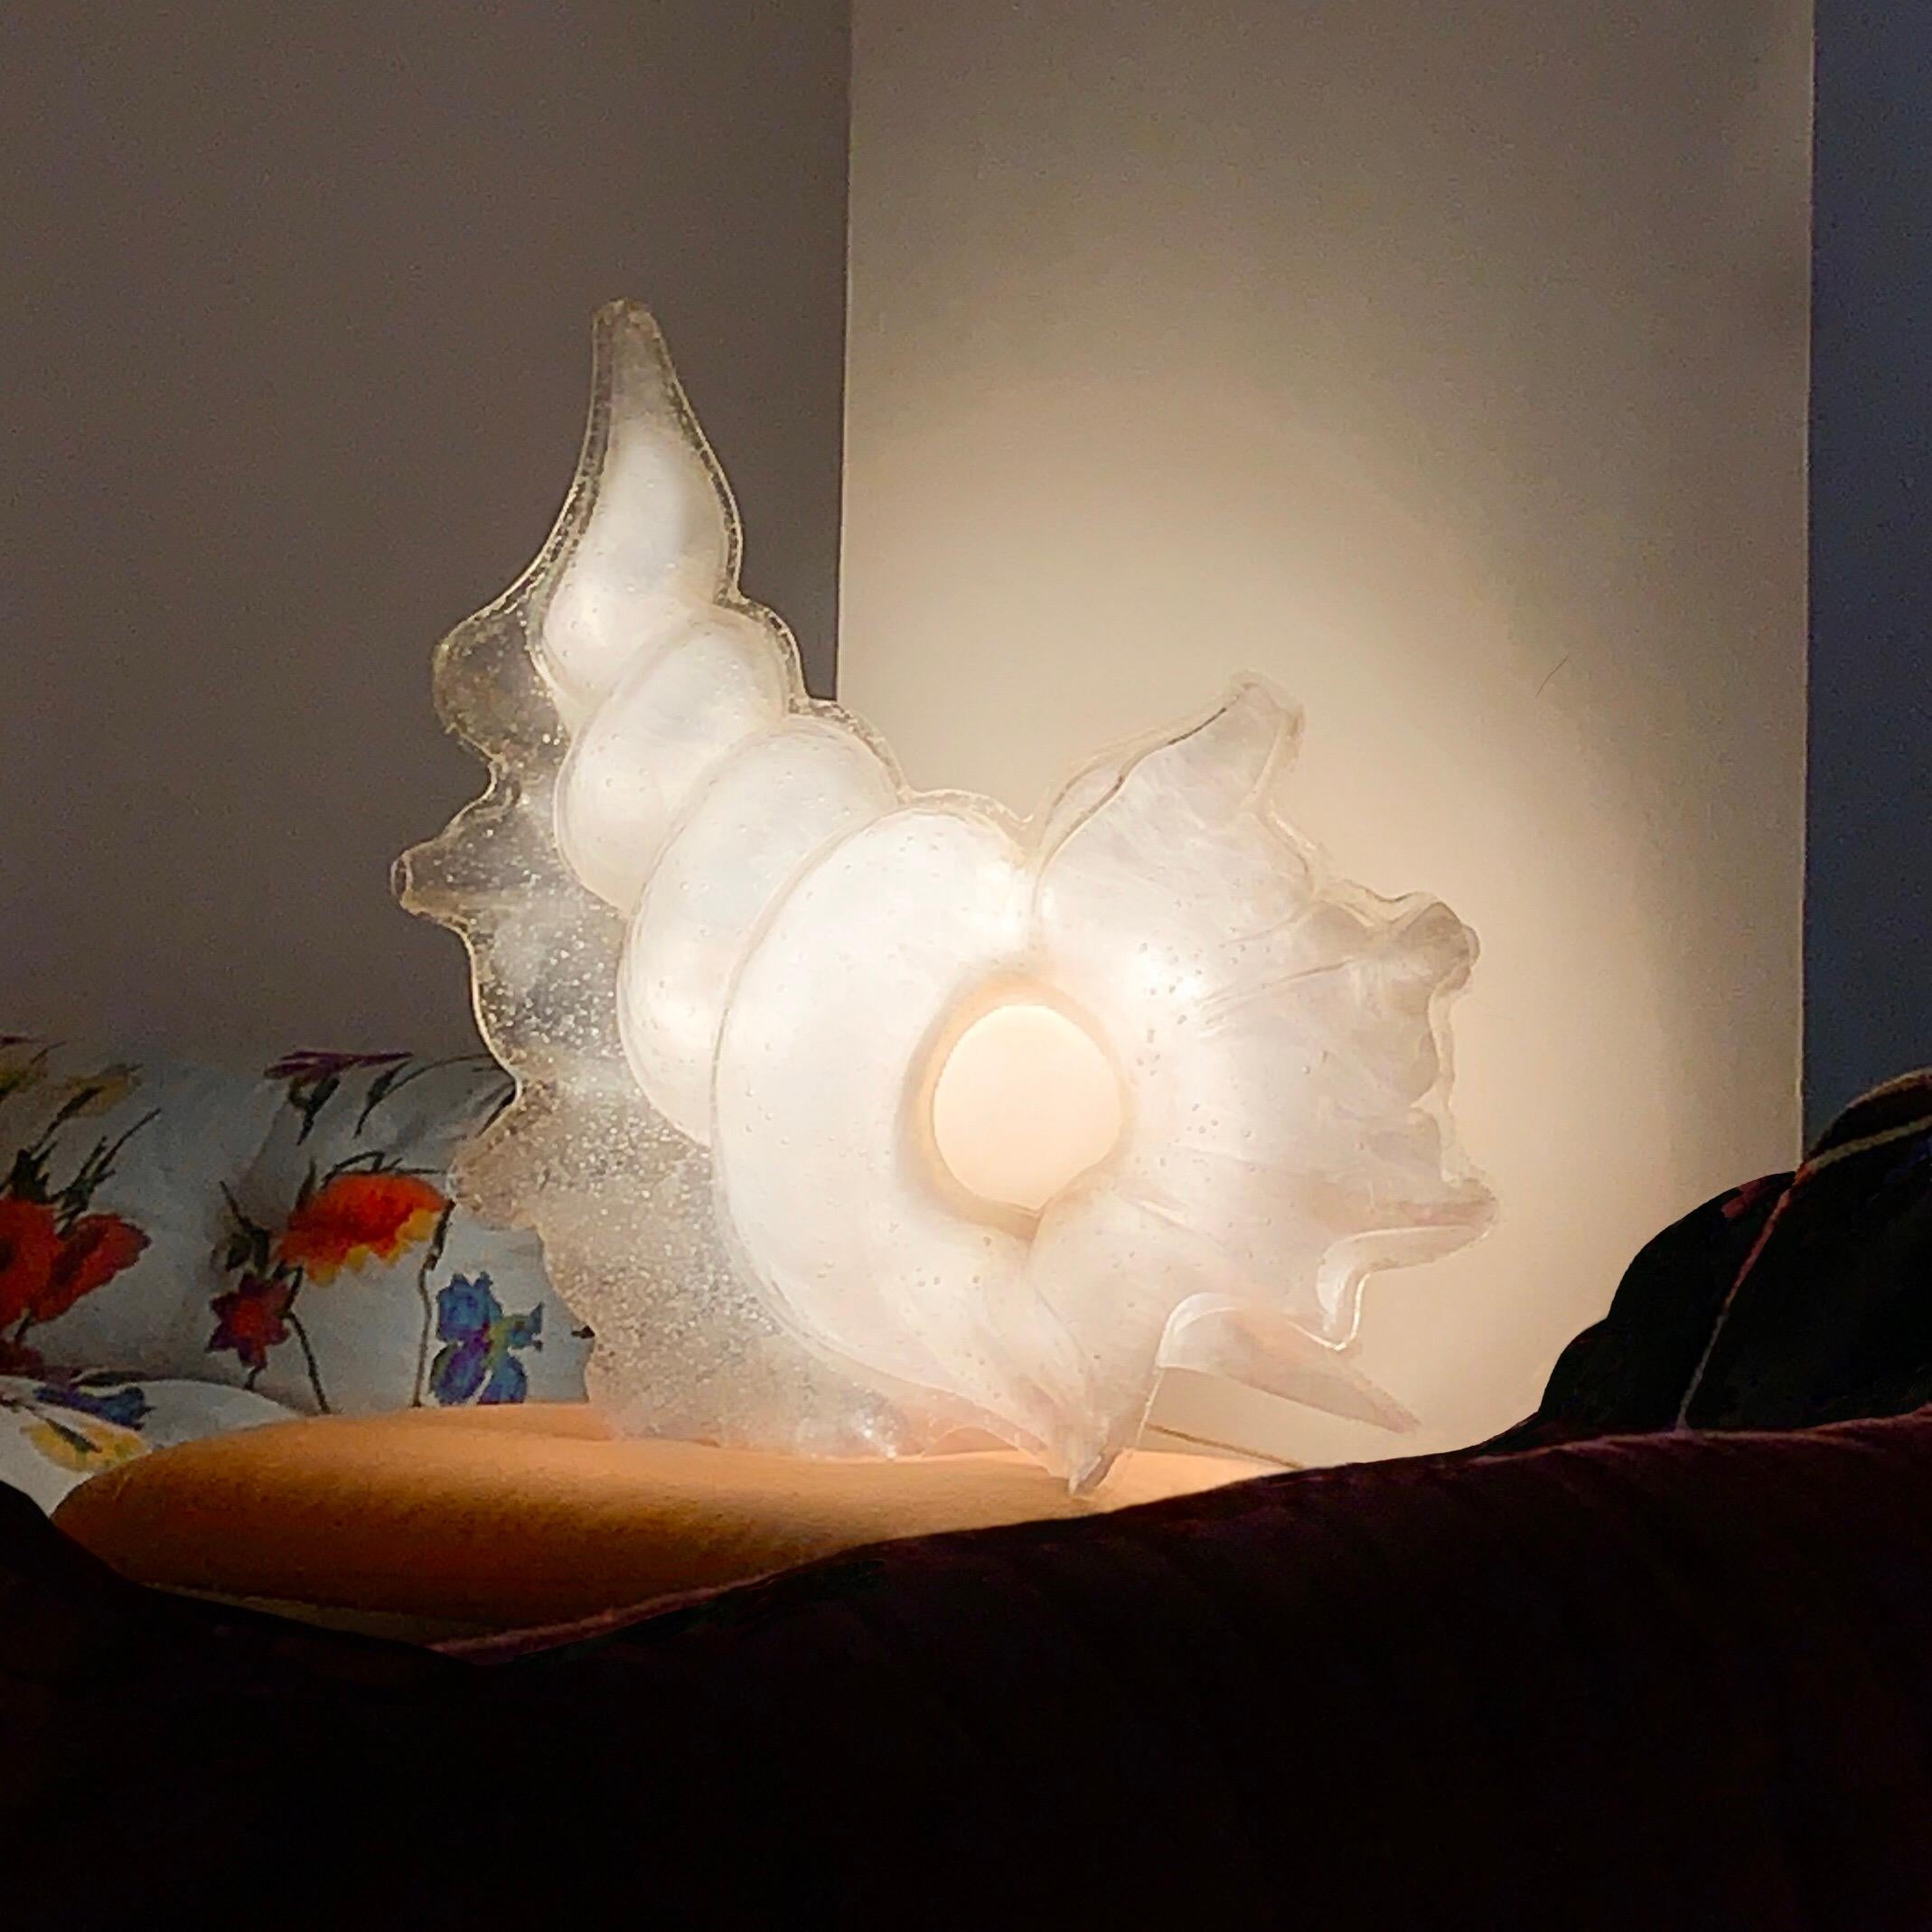 Roger Rougier Illuminated Lucite Figural Conch Shell Lamp, Mid-Century Modern.  Rare Rougier mid-century production.  Can be used on floor or table.  Conch shell illuminated from within a layered lucite structure -- Bubbled lucite in the manner of